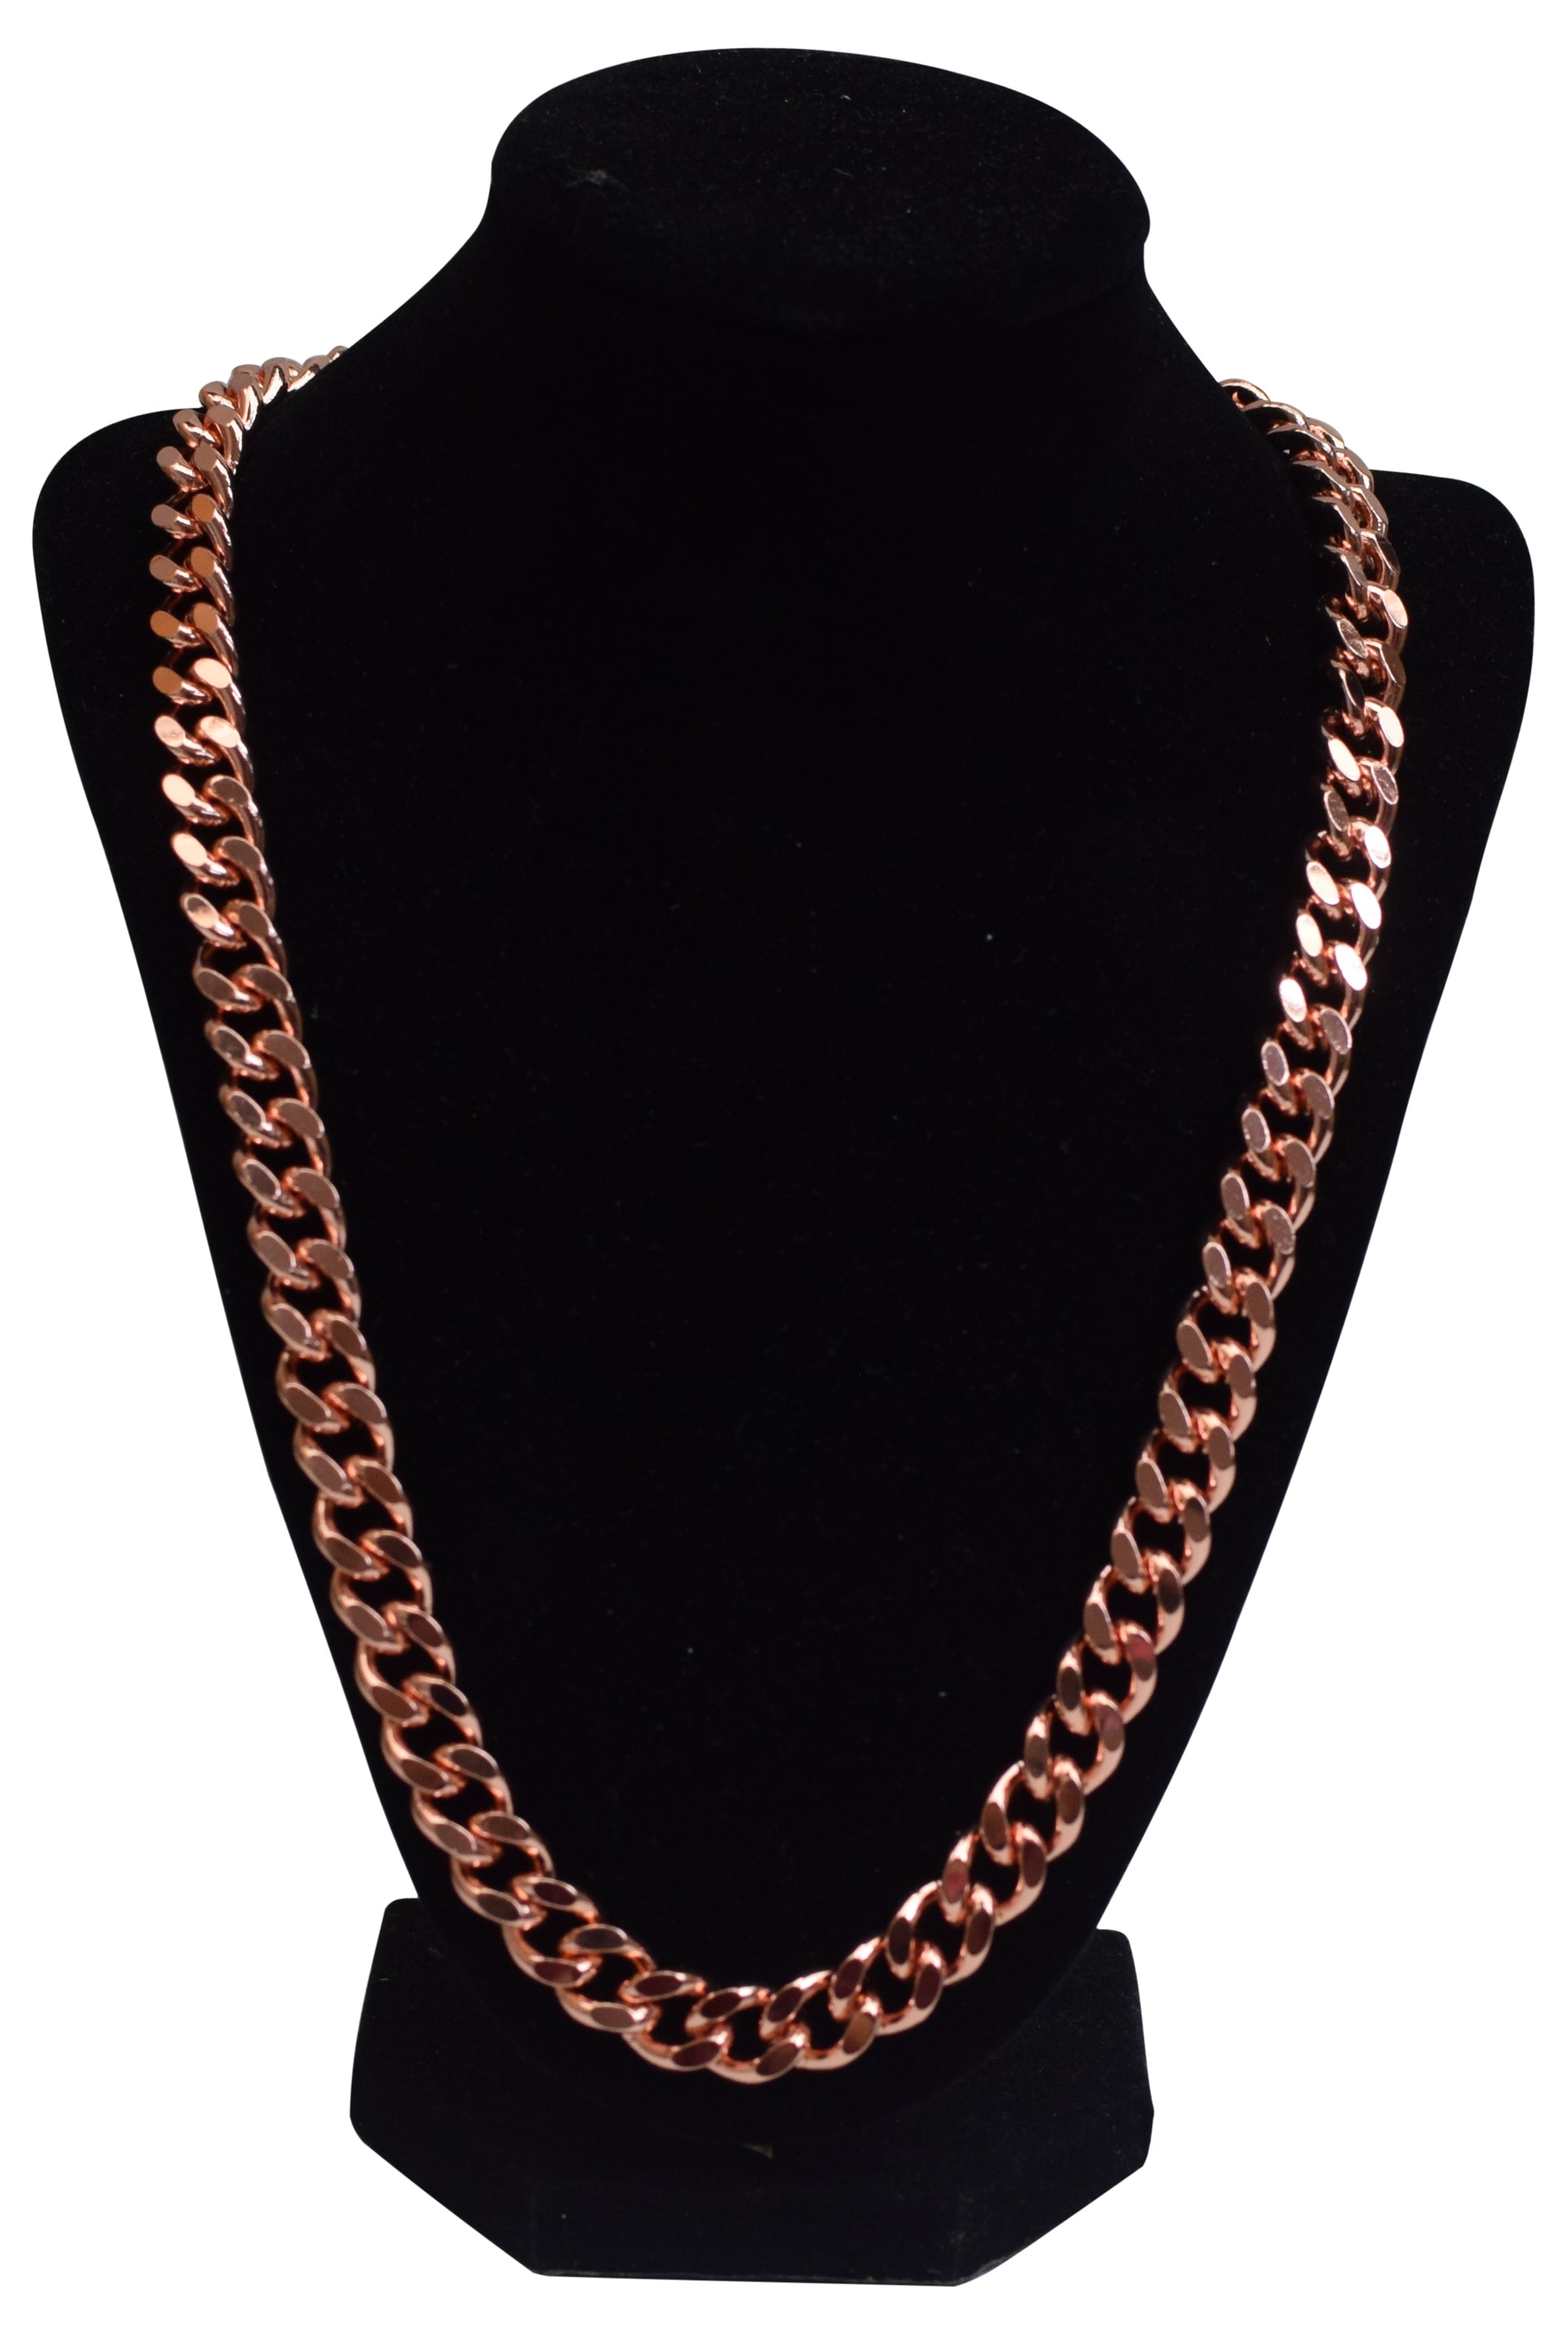 Men Chain Links Necklace, Pure Copper Handmade Antiqued Chain Links Metal  Men Collar Choker, Made to Order in Any Size 